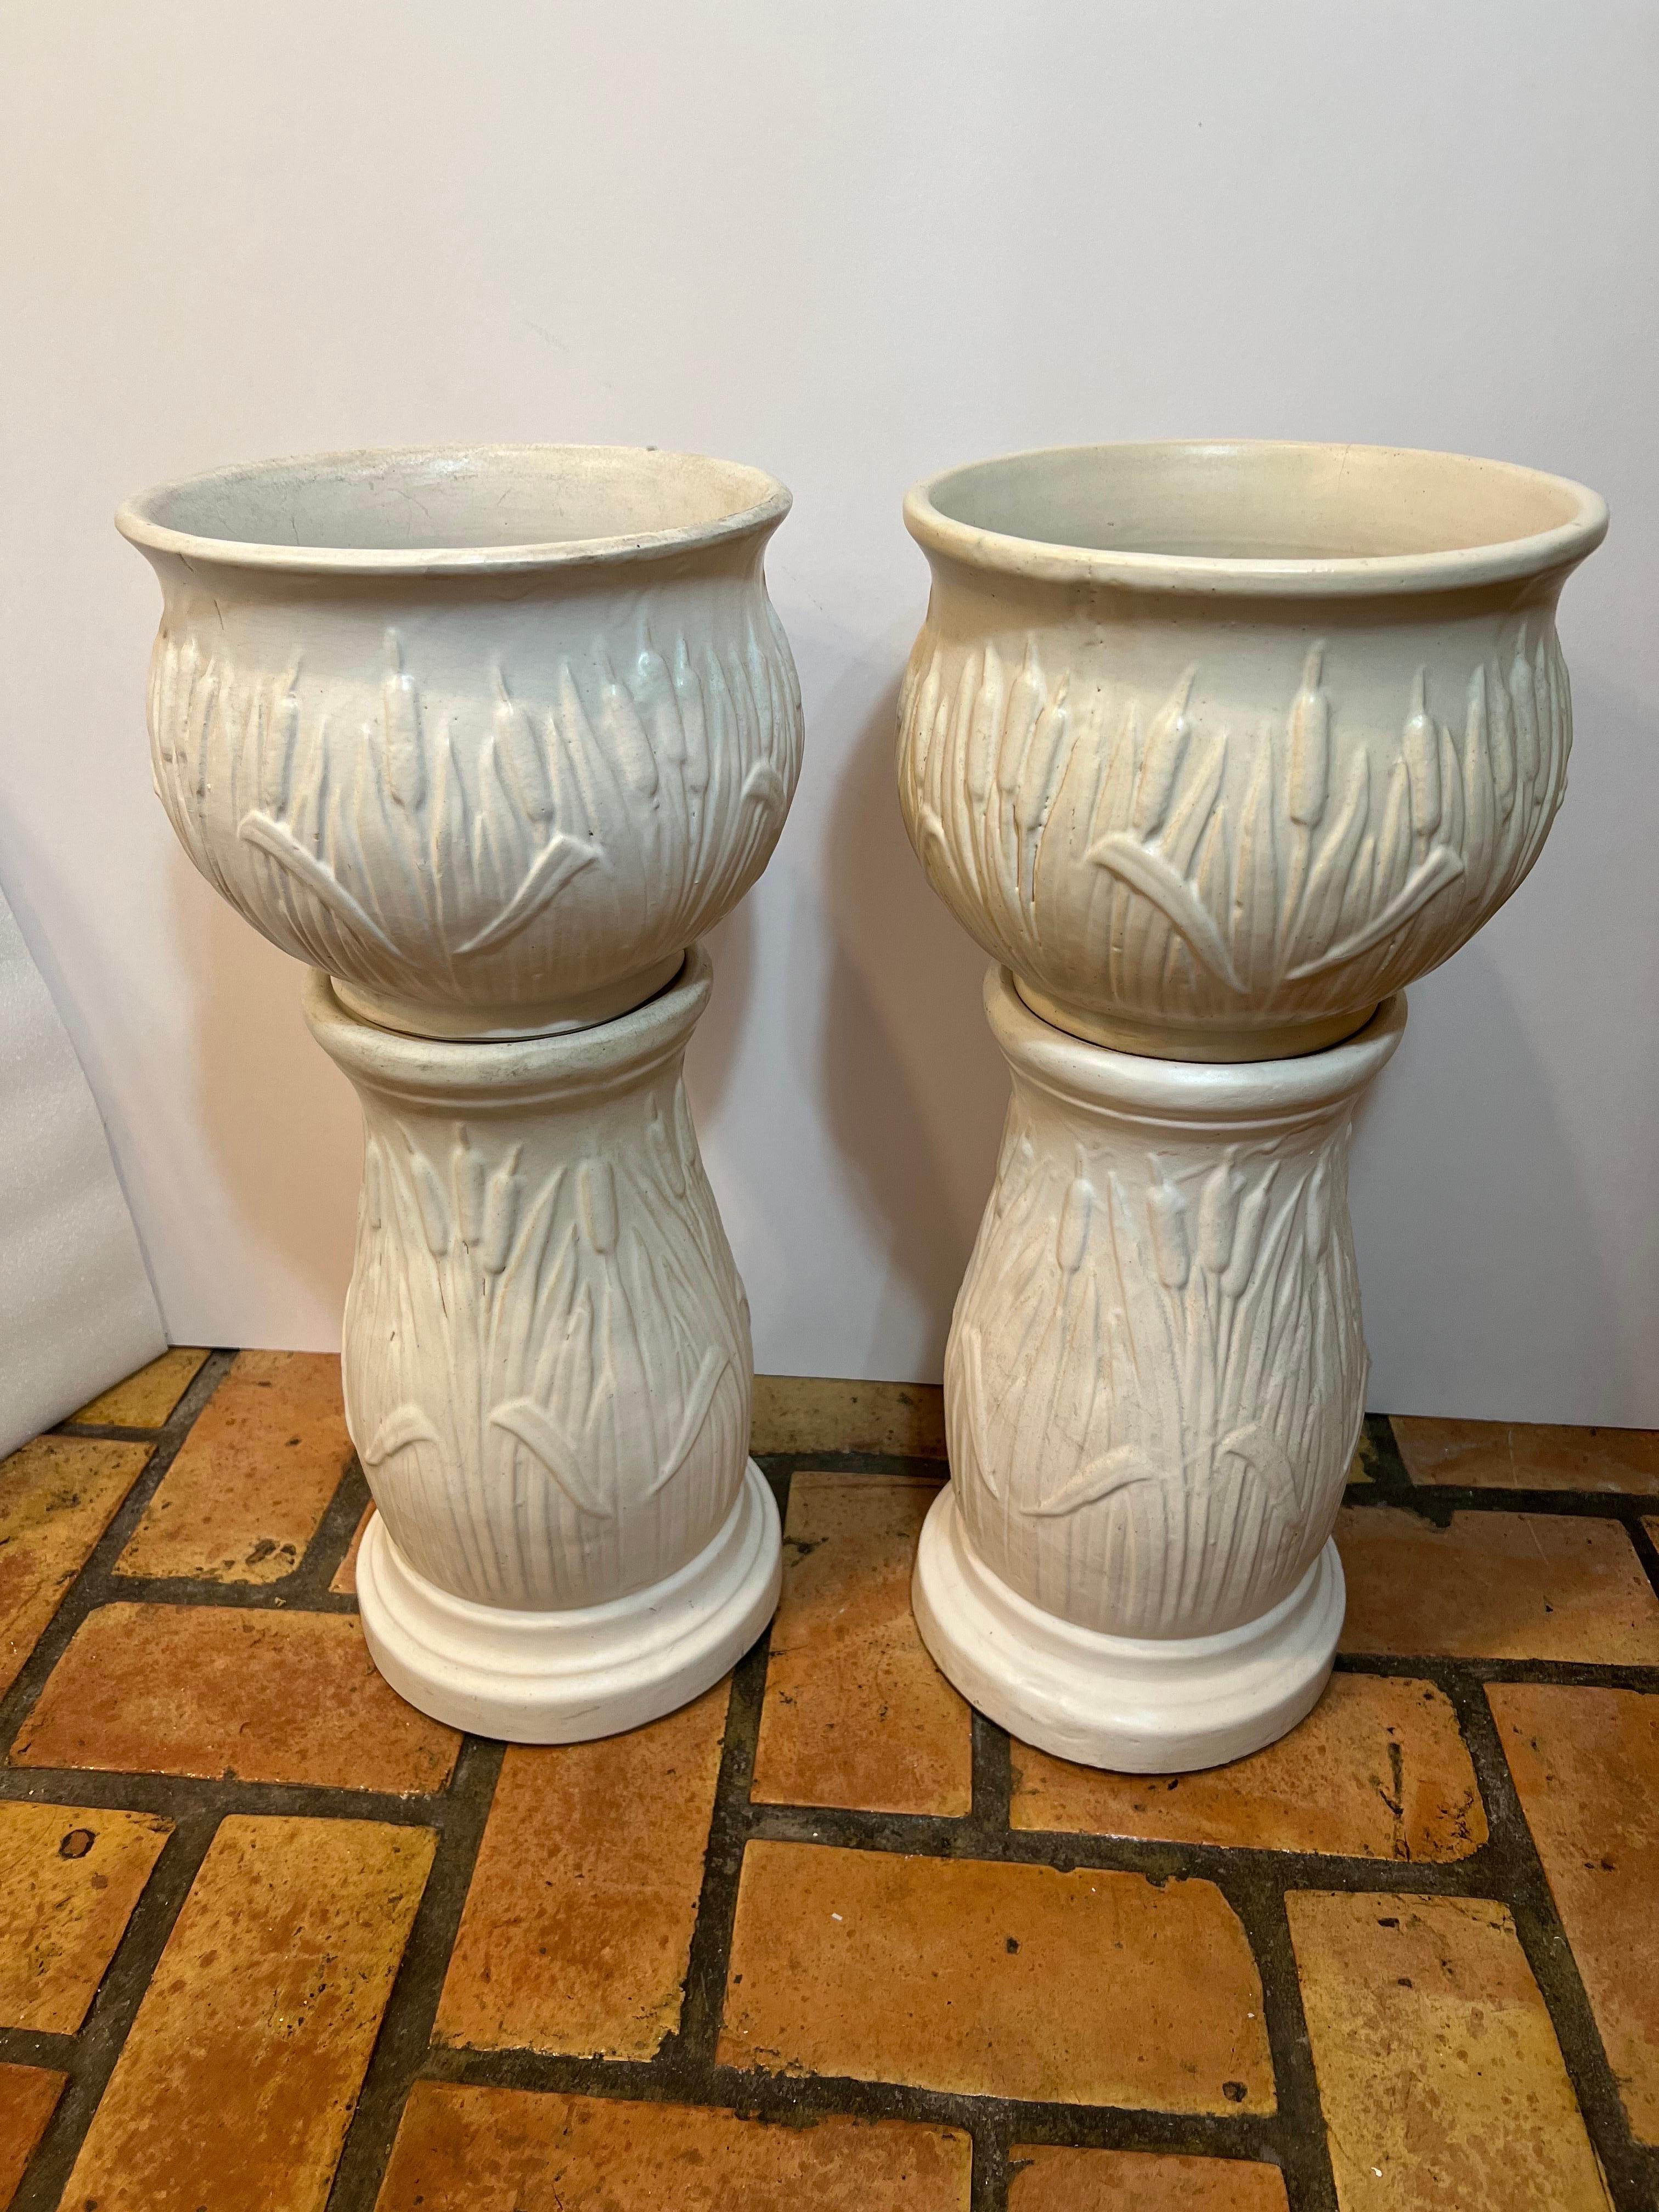 Mid-20th Century Pair of Robinson Rainsbottom Jardiniere and Pedestals with a Cattail Design